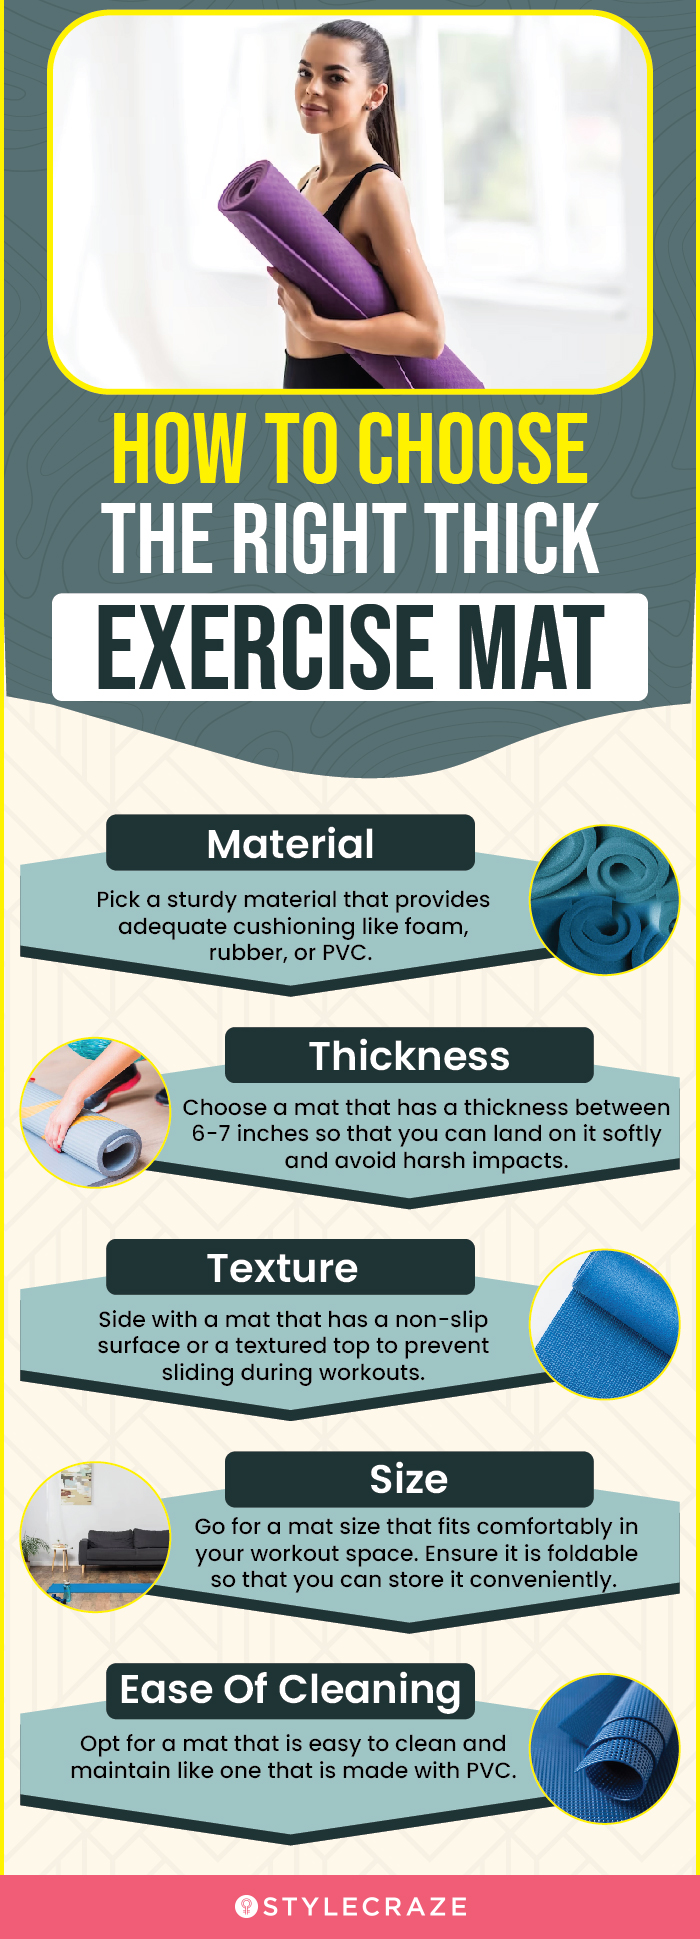 How To Choose The Right Thick Exercise Mat (infographic)